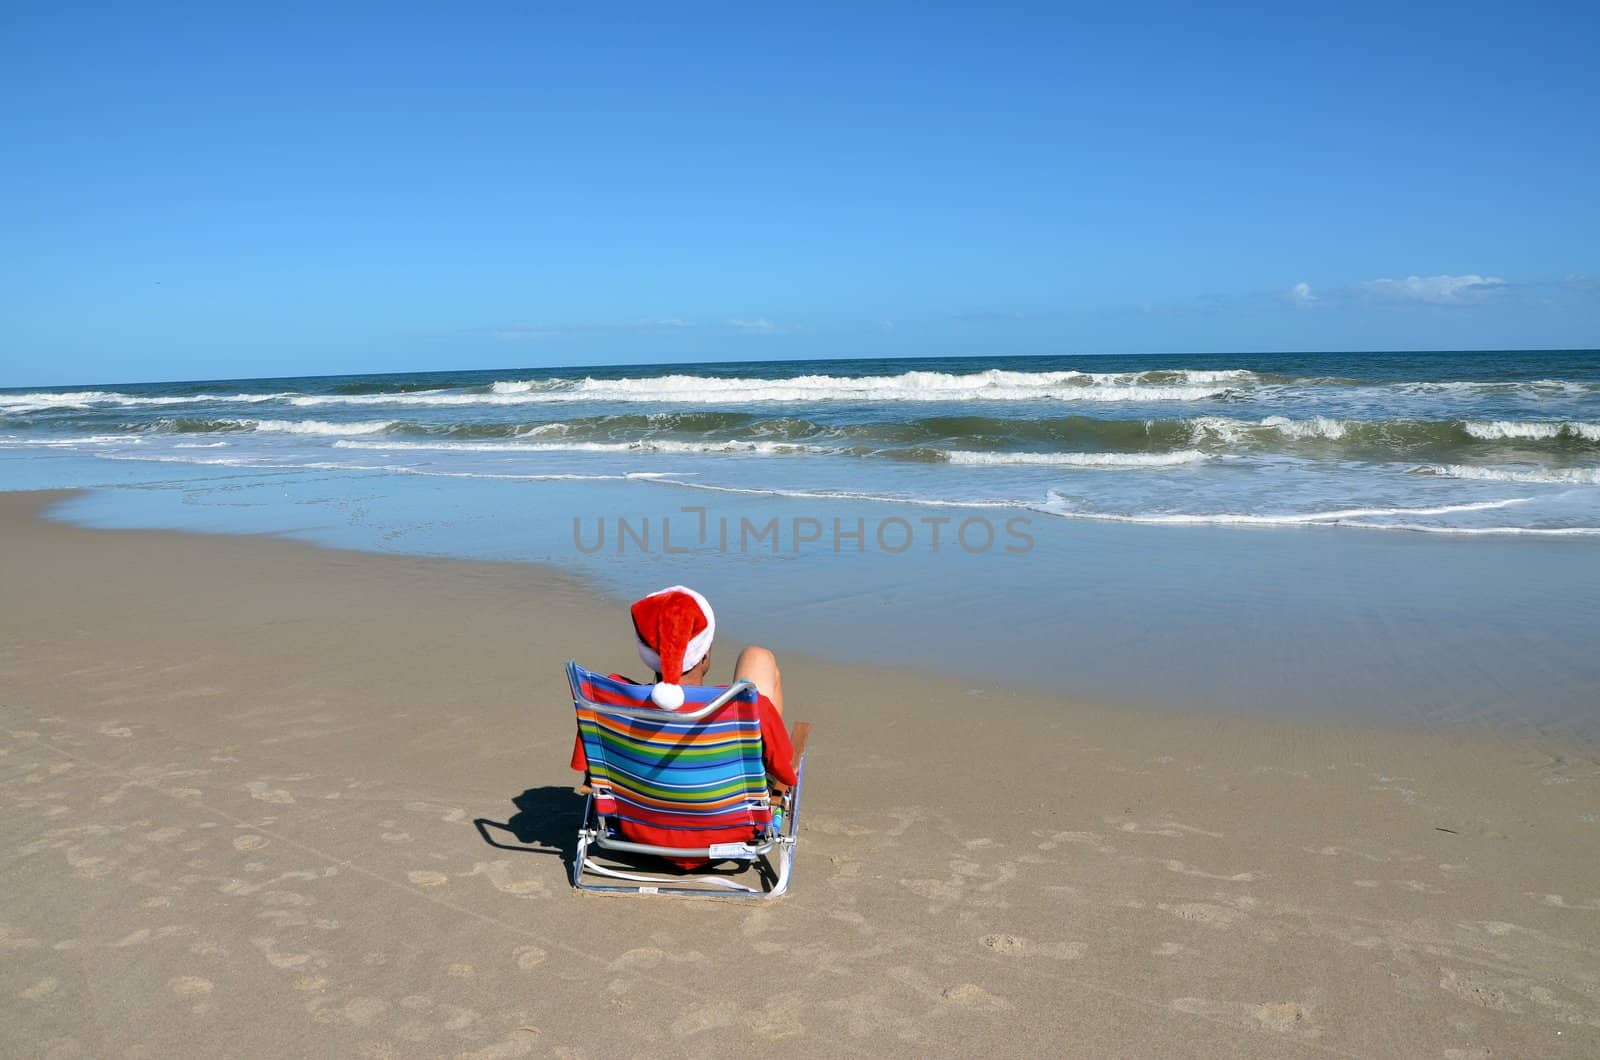 A visitor to the beach at christmas time.